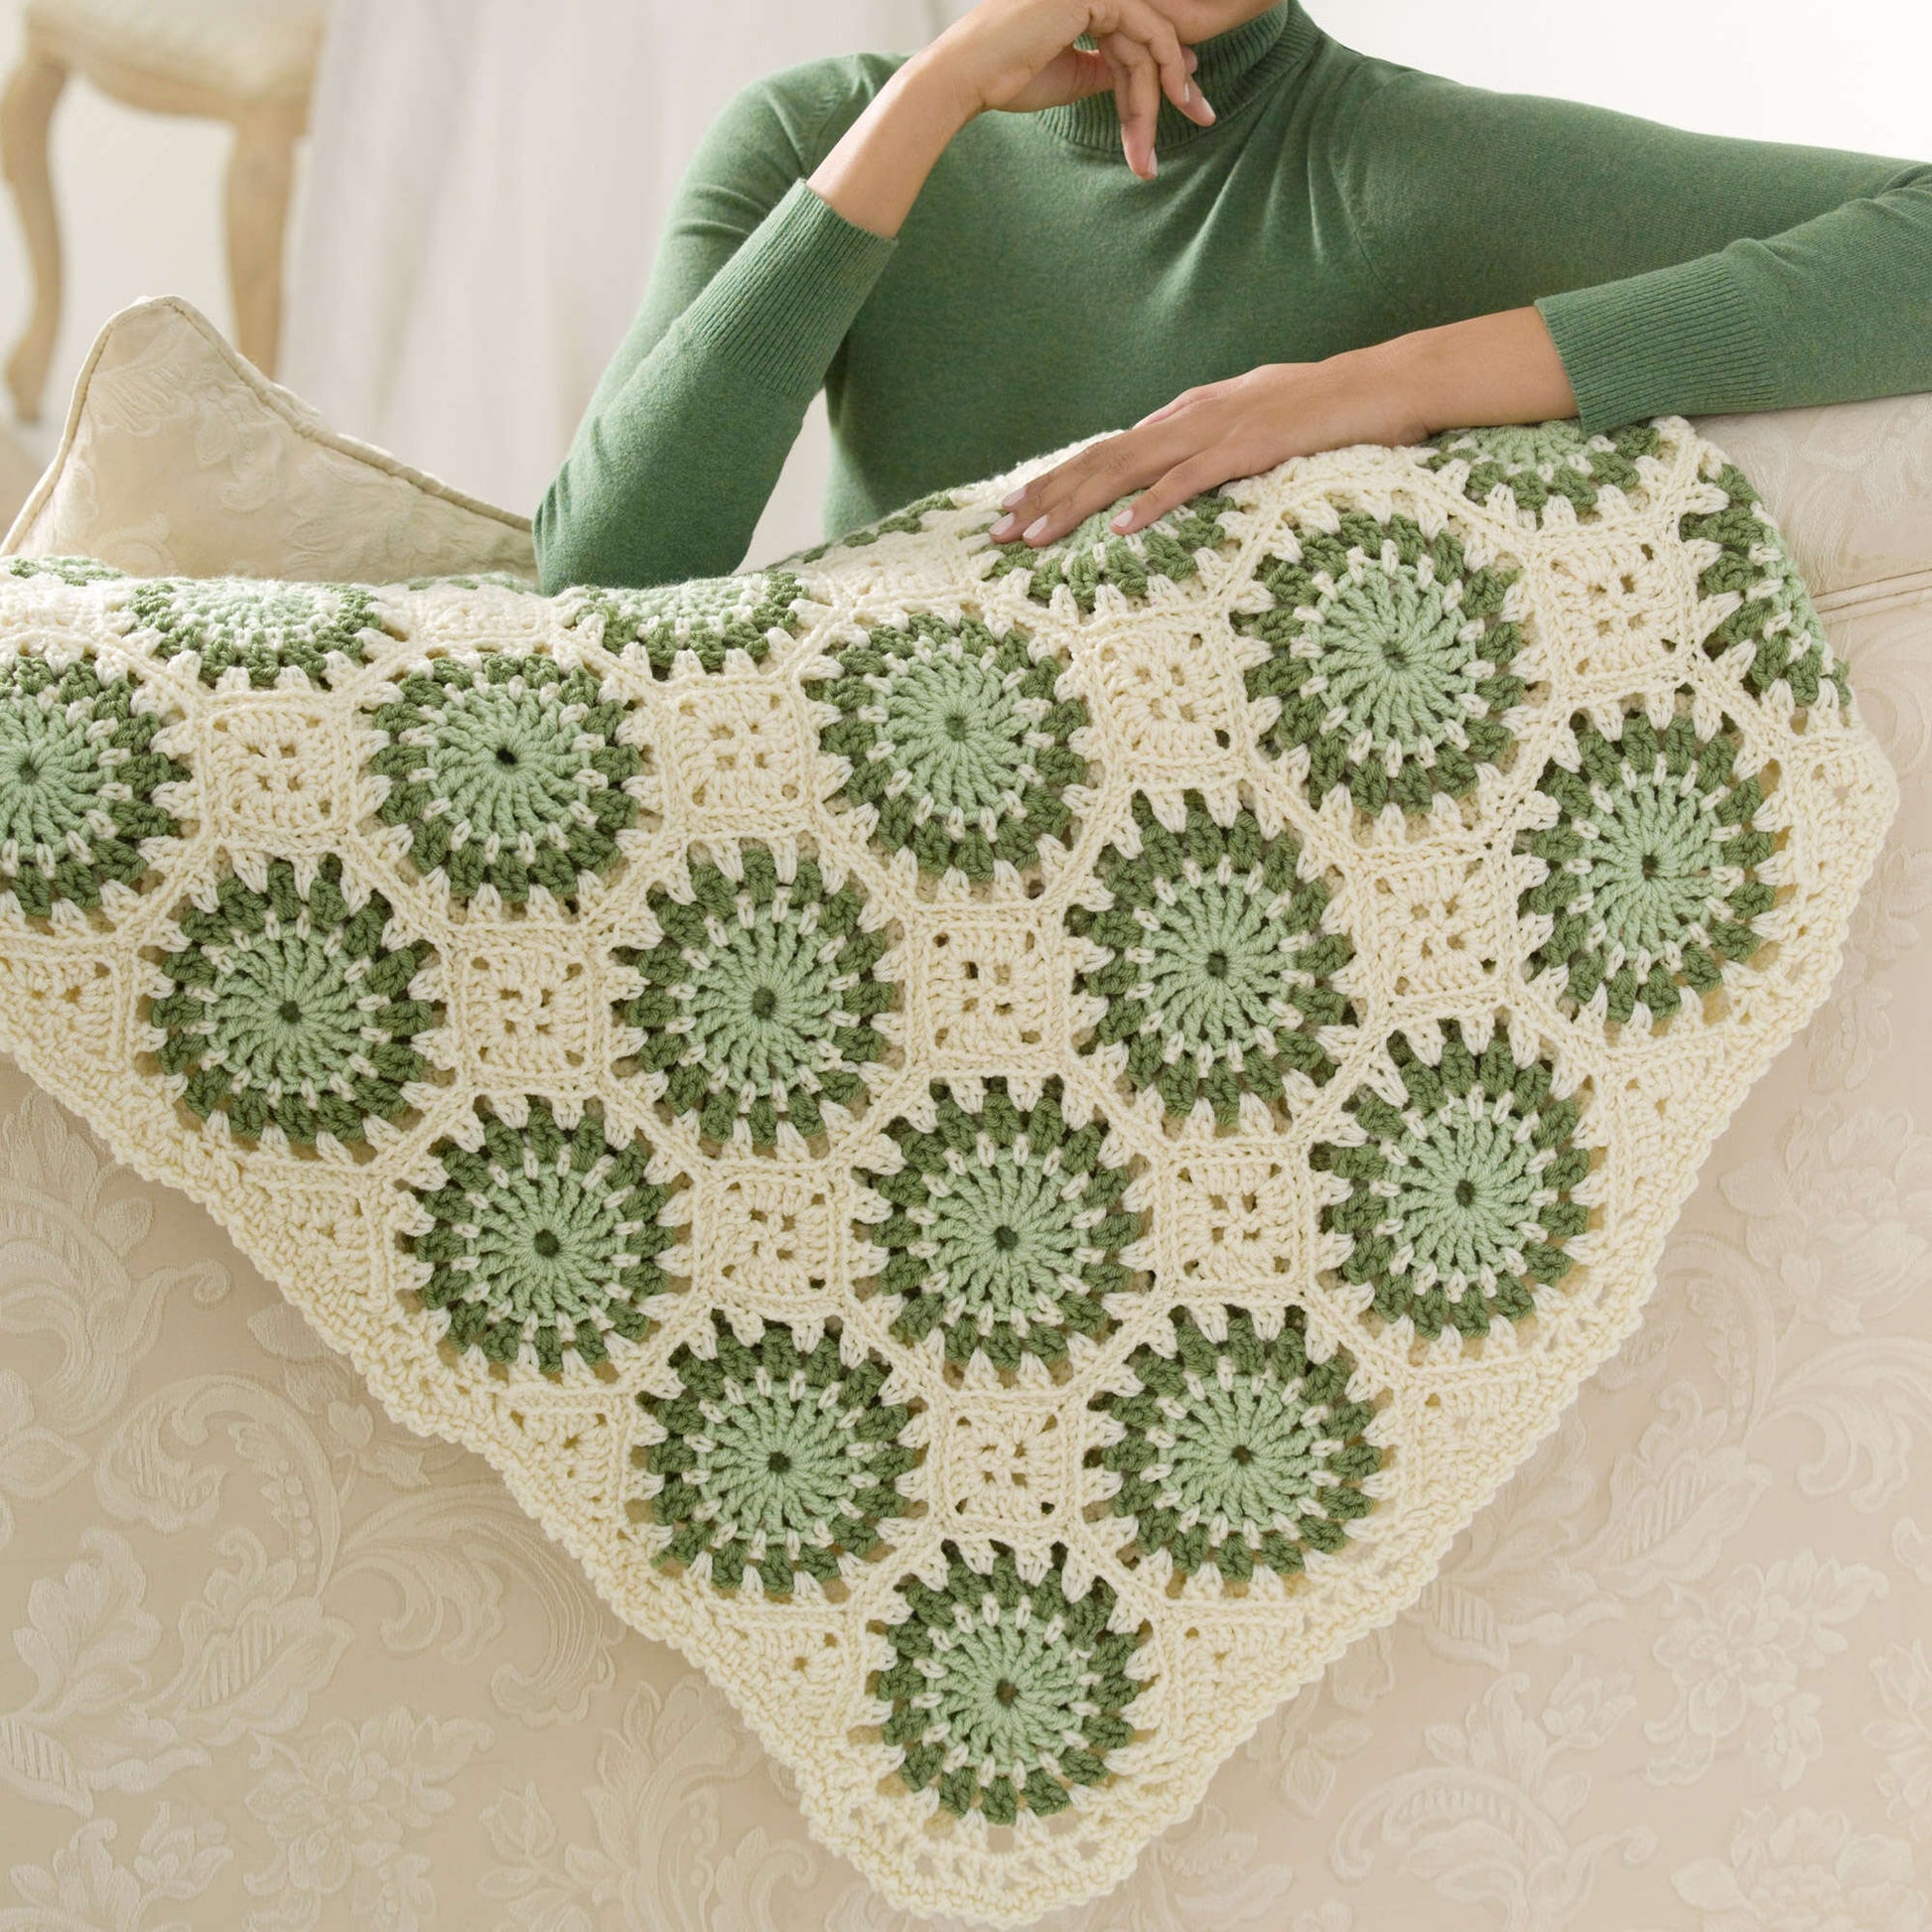 Free Red Heart Circles In Octagons Throw Crochet Pattern